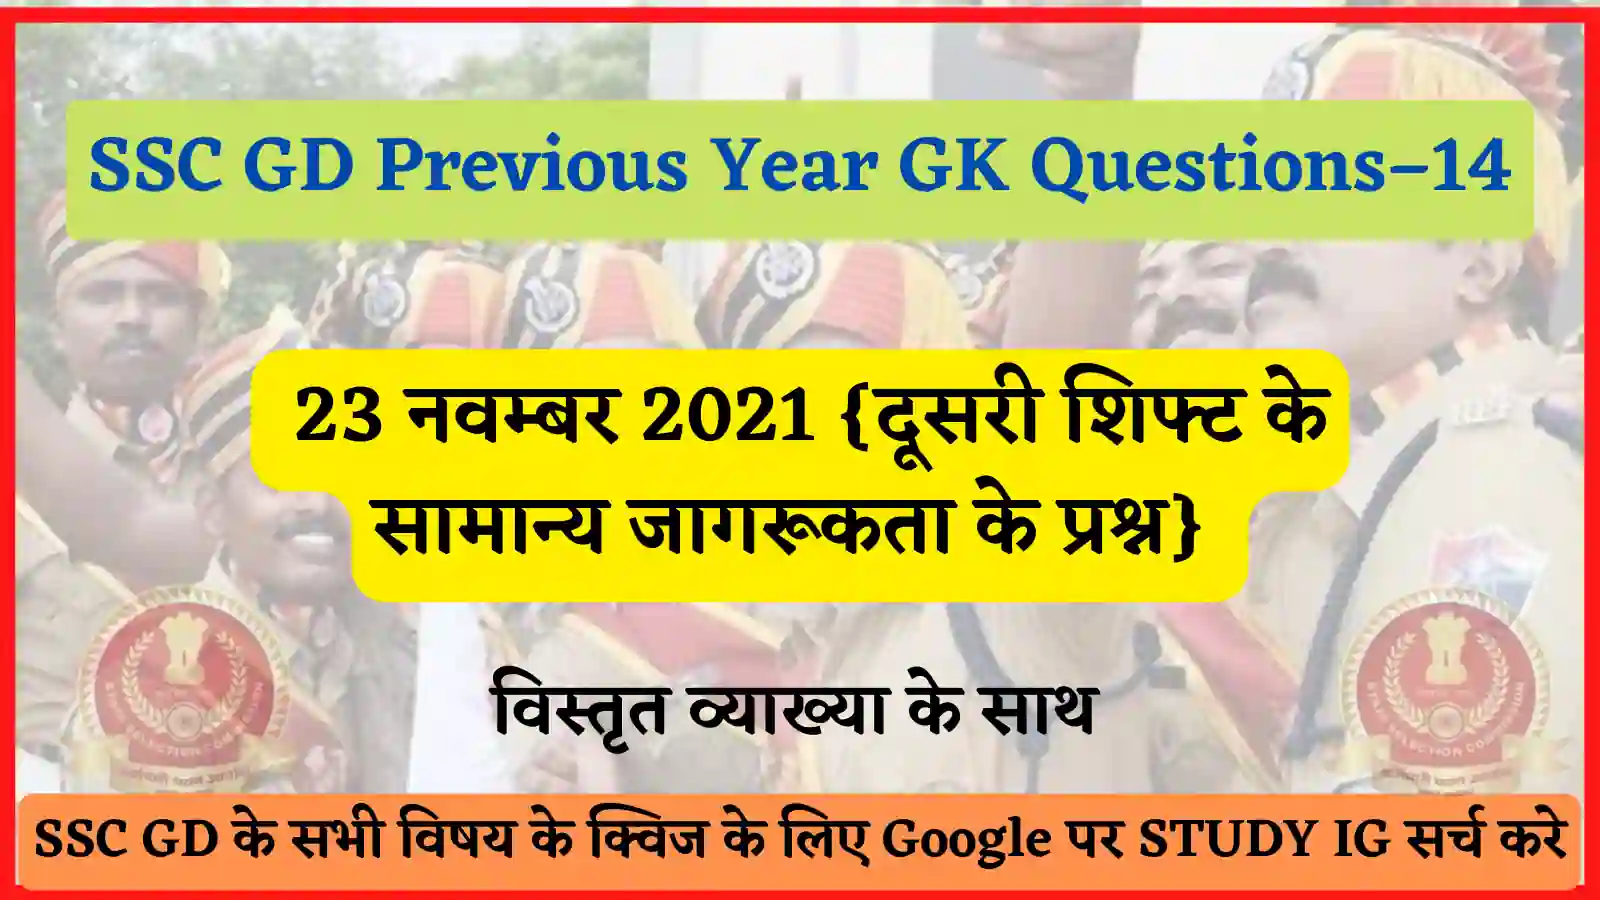 SSC GD Previous Year GK Questions / Quiz - 14